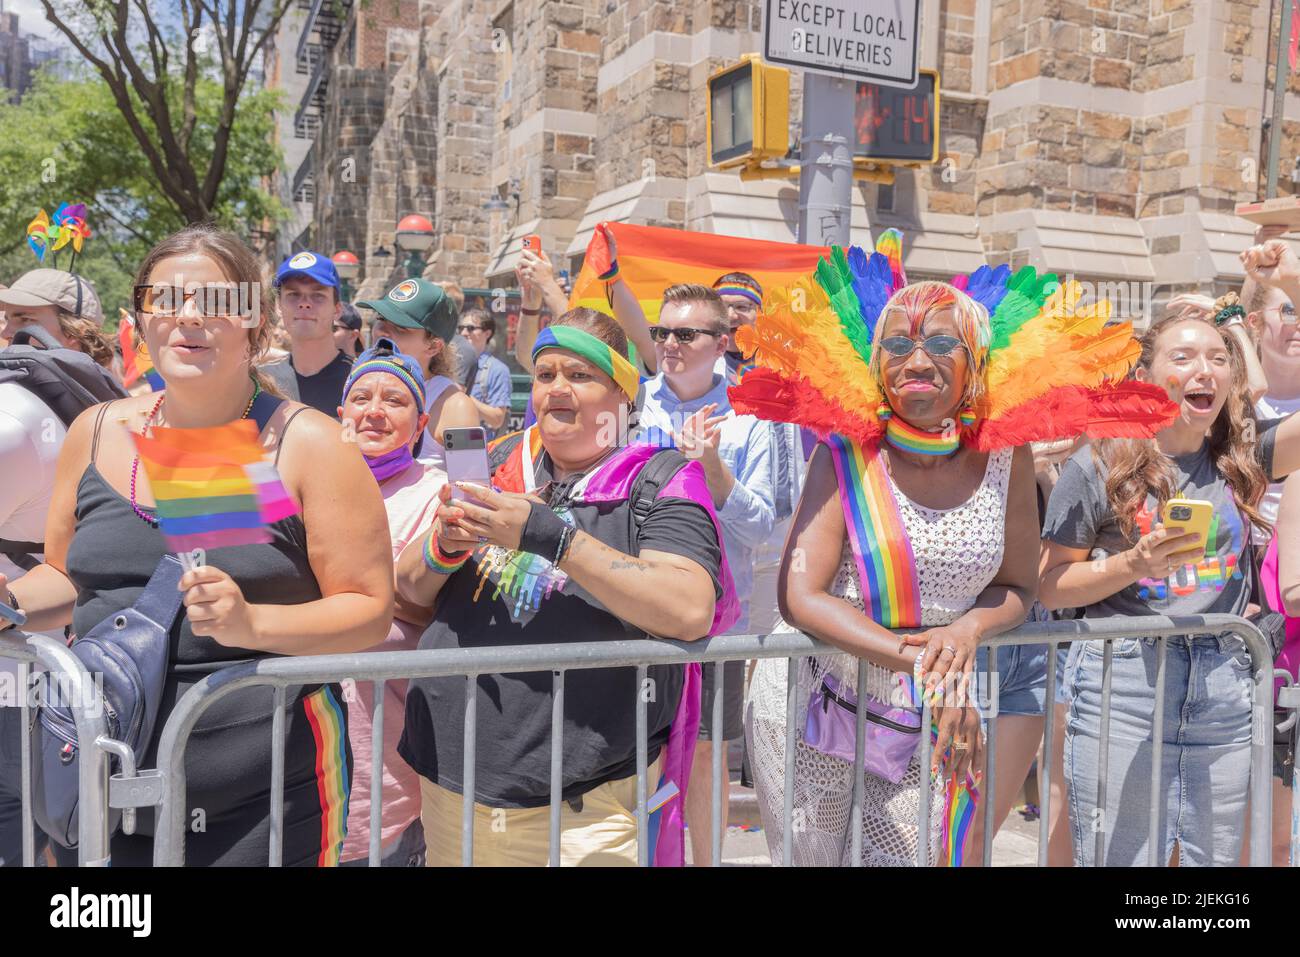 NEW YORK, N.Y. – June 26, 2022: Spectators are seen at the 2022 NYC Pride March in Manhattan. Stock Photo